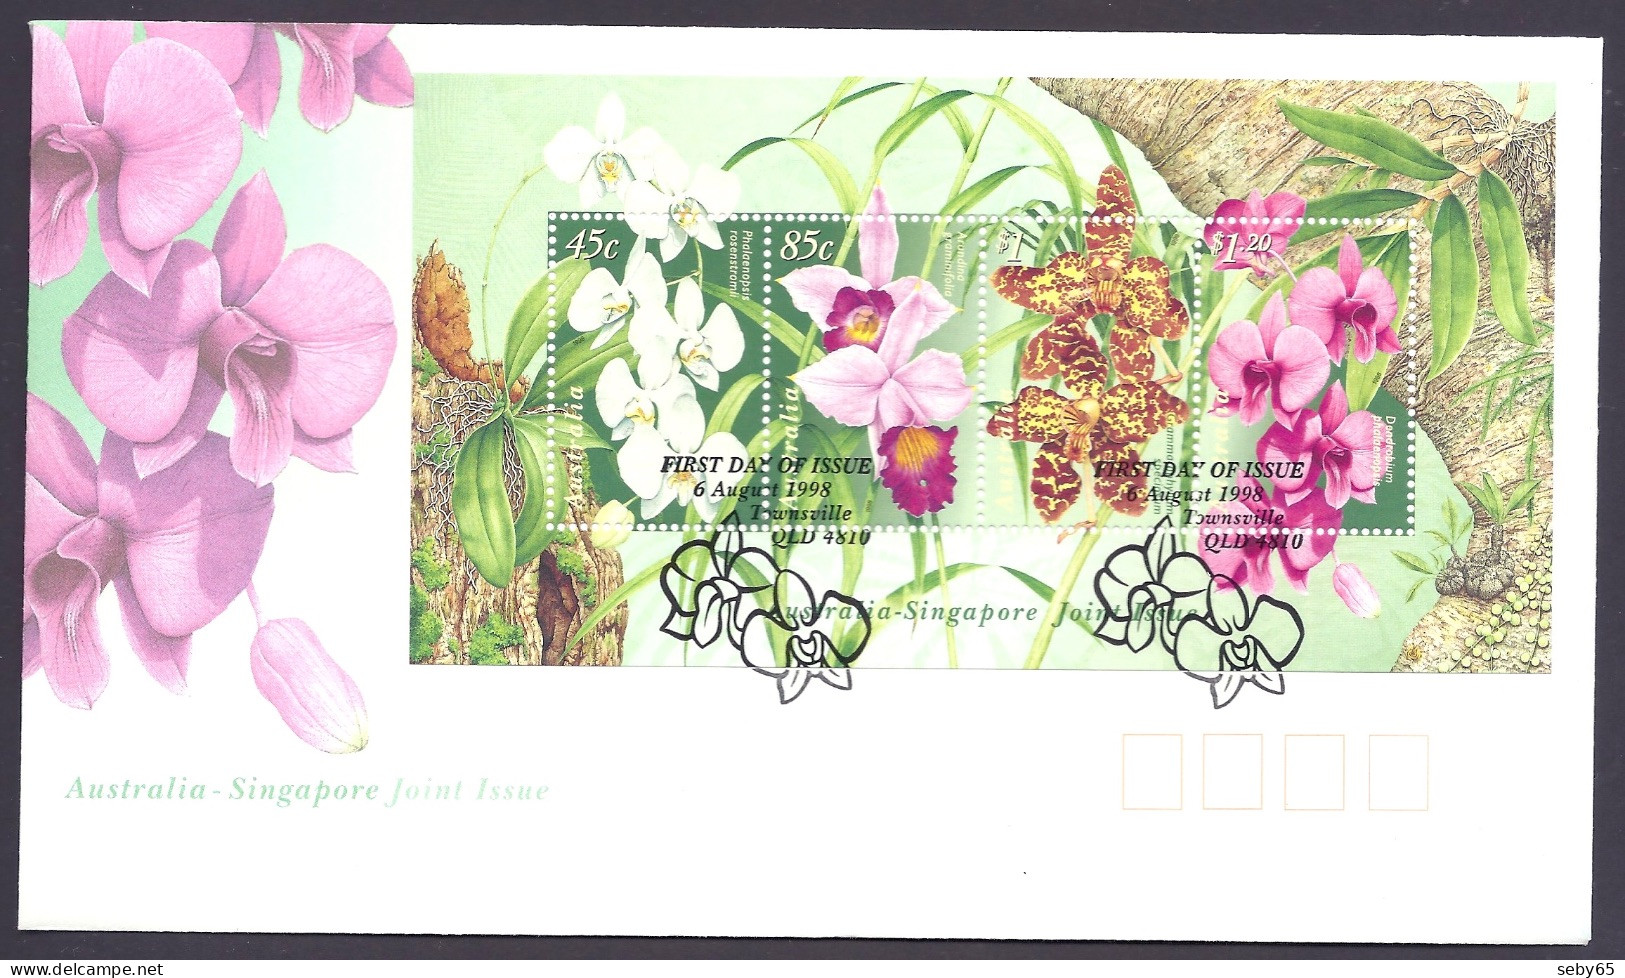 Australia 1998 - Flora, Flowers, Native Orchids, Orchid, Joint Issue With Singapore - Miniature Sheet FDC - Primo Giorno D'emissione (FDC)